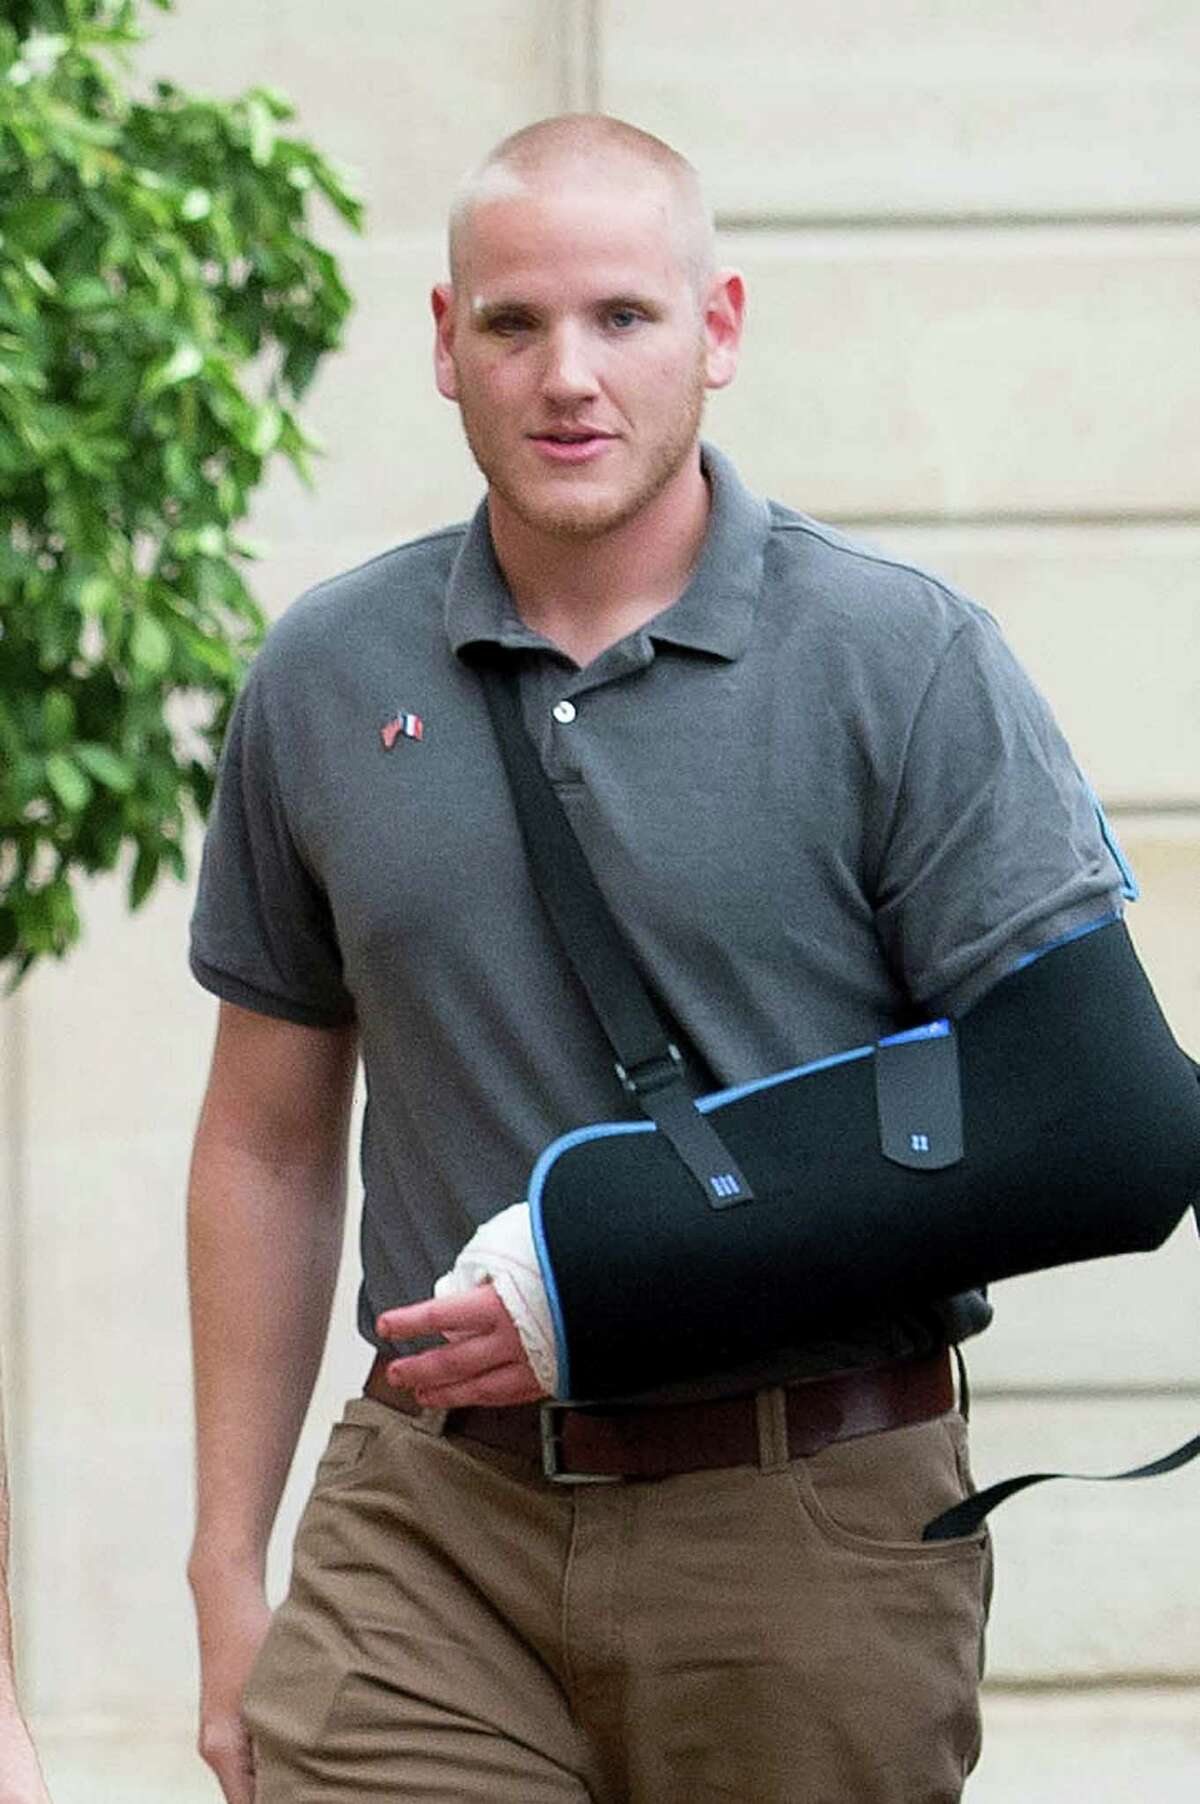 FILE - October 8: US Airman Spencer Stone, who stopped a terror attack on a train in France in August, has been stabbed several times, according to reports. PARIS, FRANCE - AUGUST 24: Spencer Stone attends a reception at Elysee Palace on August 24, 2015 in Paris, France. Spencer Stone, Anthony Sadler, Alek Skarlatos and Chris Norman are being awarded the Legion d'Honneur after overpowering the gunman, 25-year-old Moroccan, Ayoub El-Khazzani, on board a high-speed train after he opened fire on a Thalys train travelling from Amsterdam to Paris. El-Khazzani, who had a Kalashnikov, an automatic pistol and a box cutter, was arrested when the train stopped at the French town of Arras. (Photo by Aurelien Meunier/Getty Images)